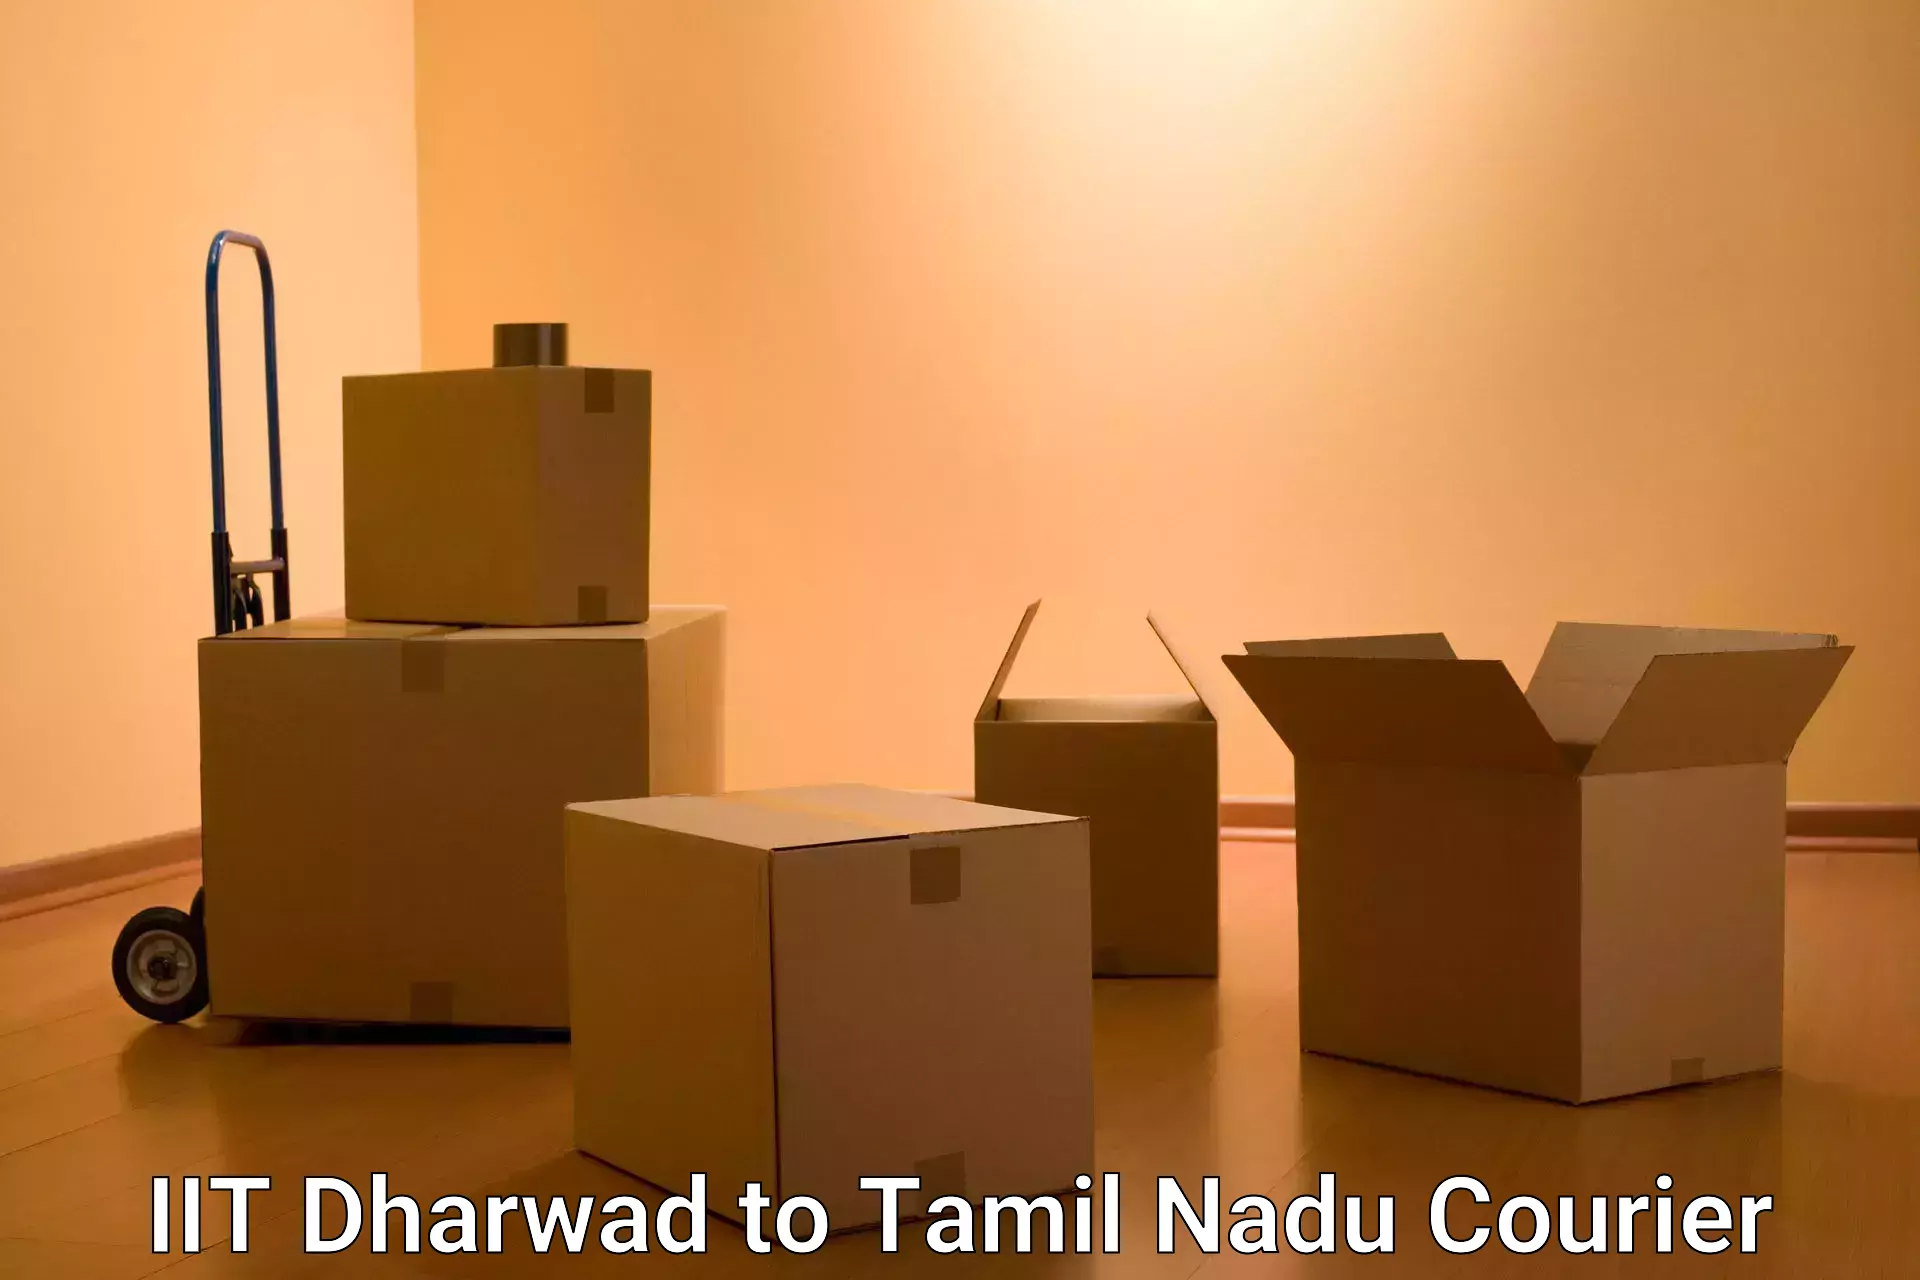 Parcel service for businesses IIT Dharwad to Chennai Port